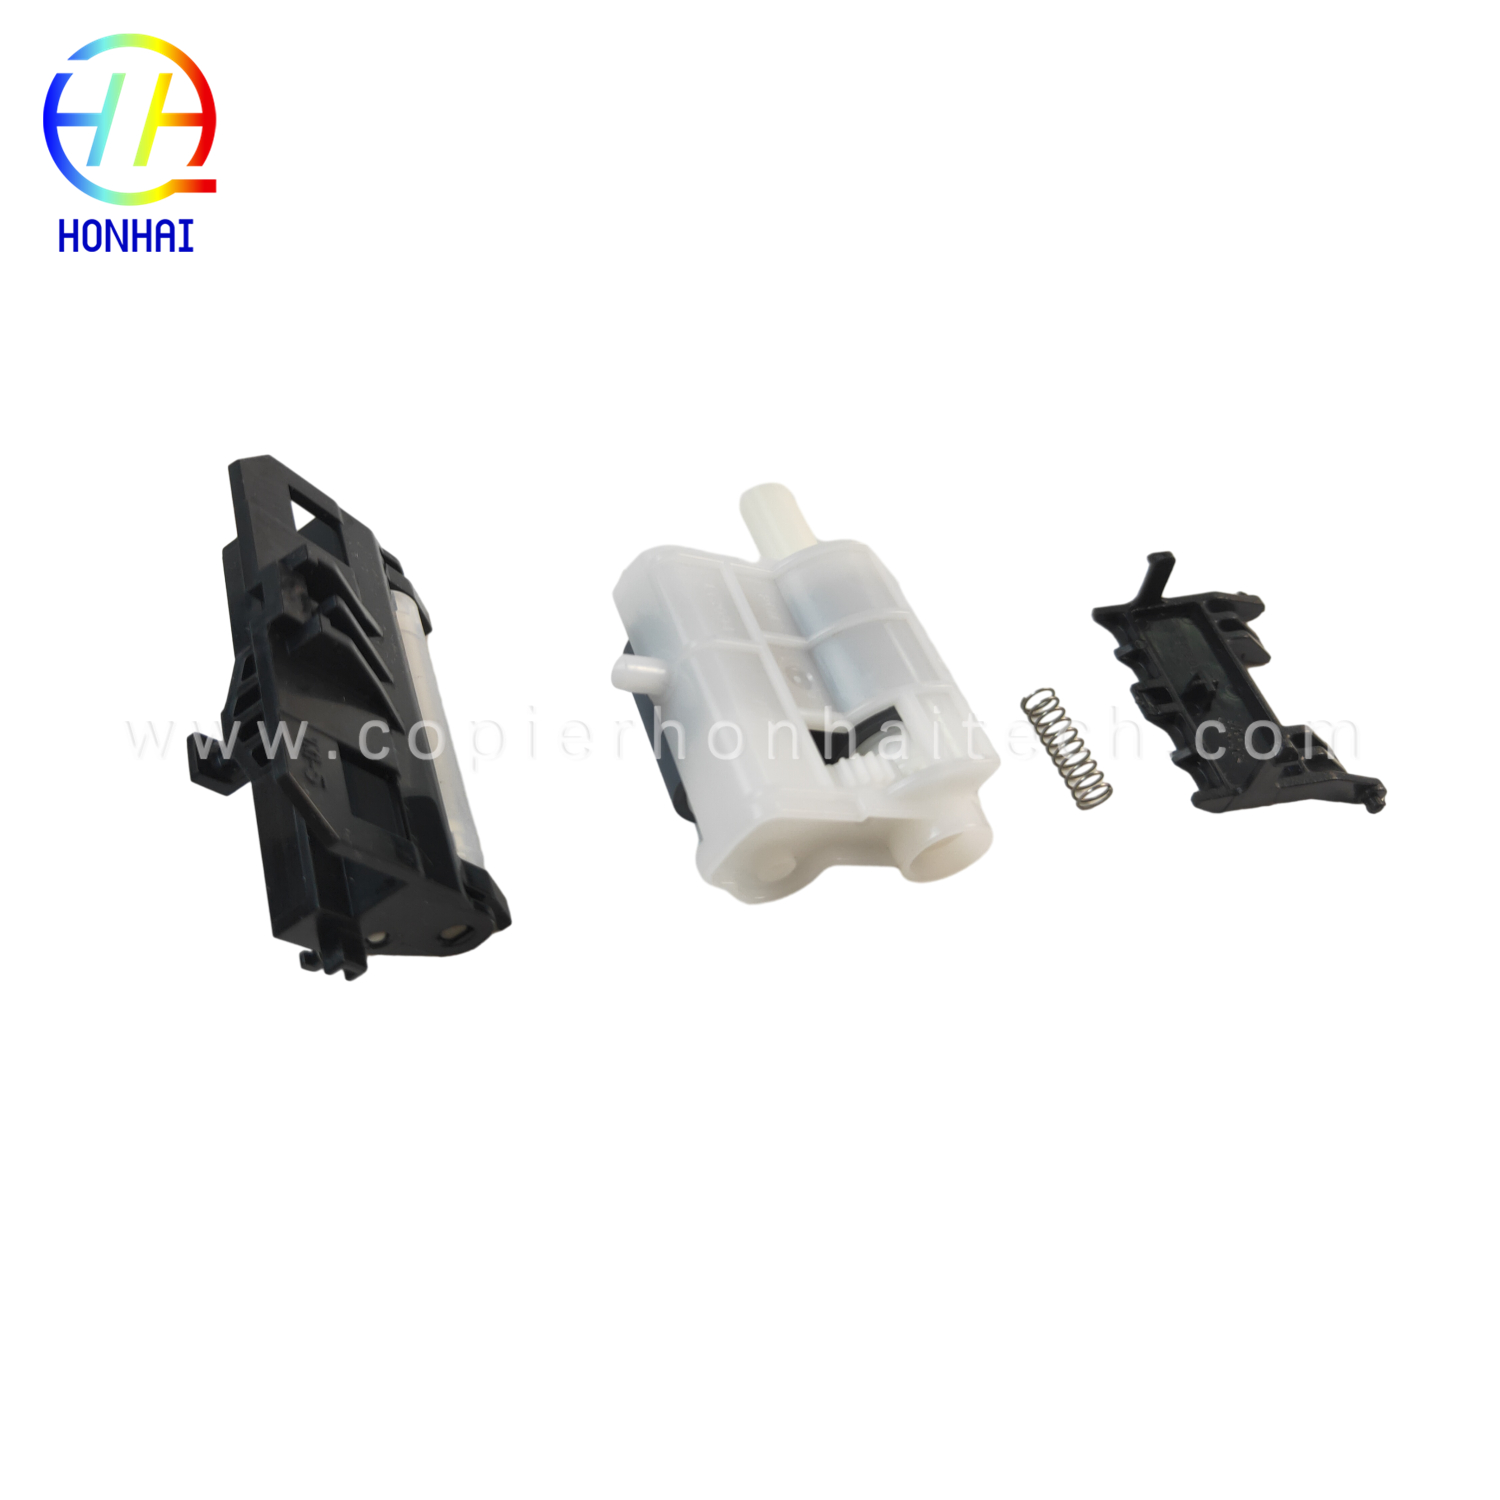 https://www.copierhonhaitech.com/pickup-feed-assemble-and-separation-pad-kit-for-brother-dcp-l2540dw-product/